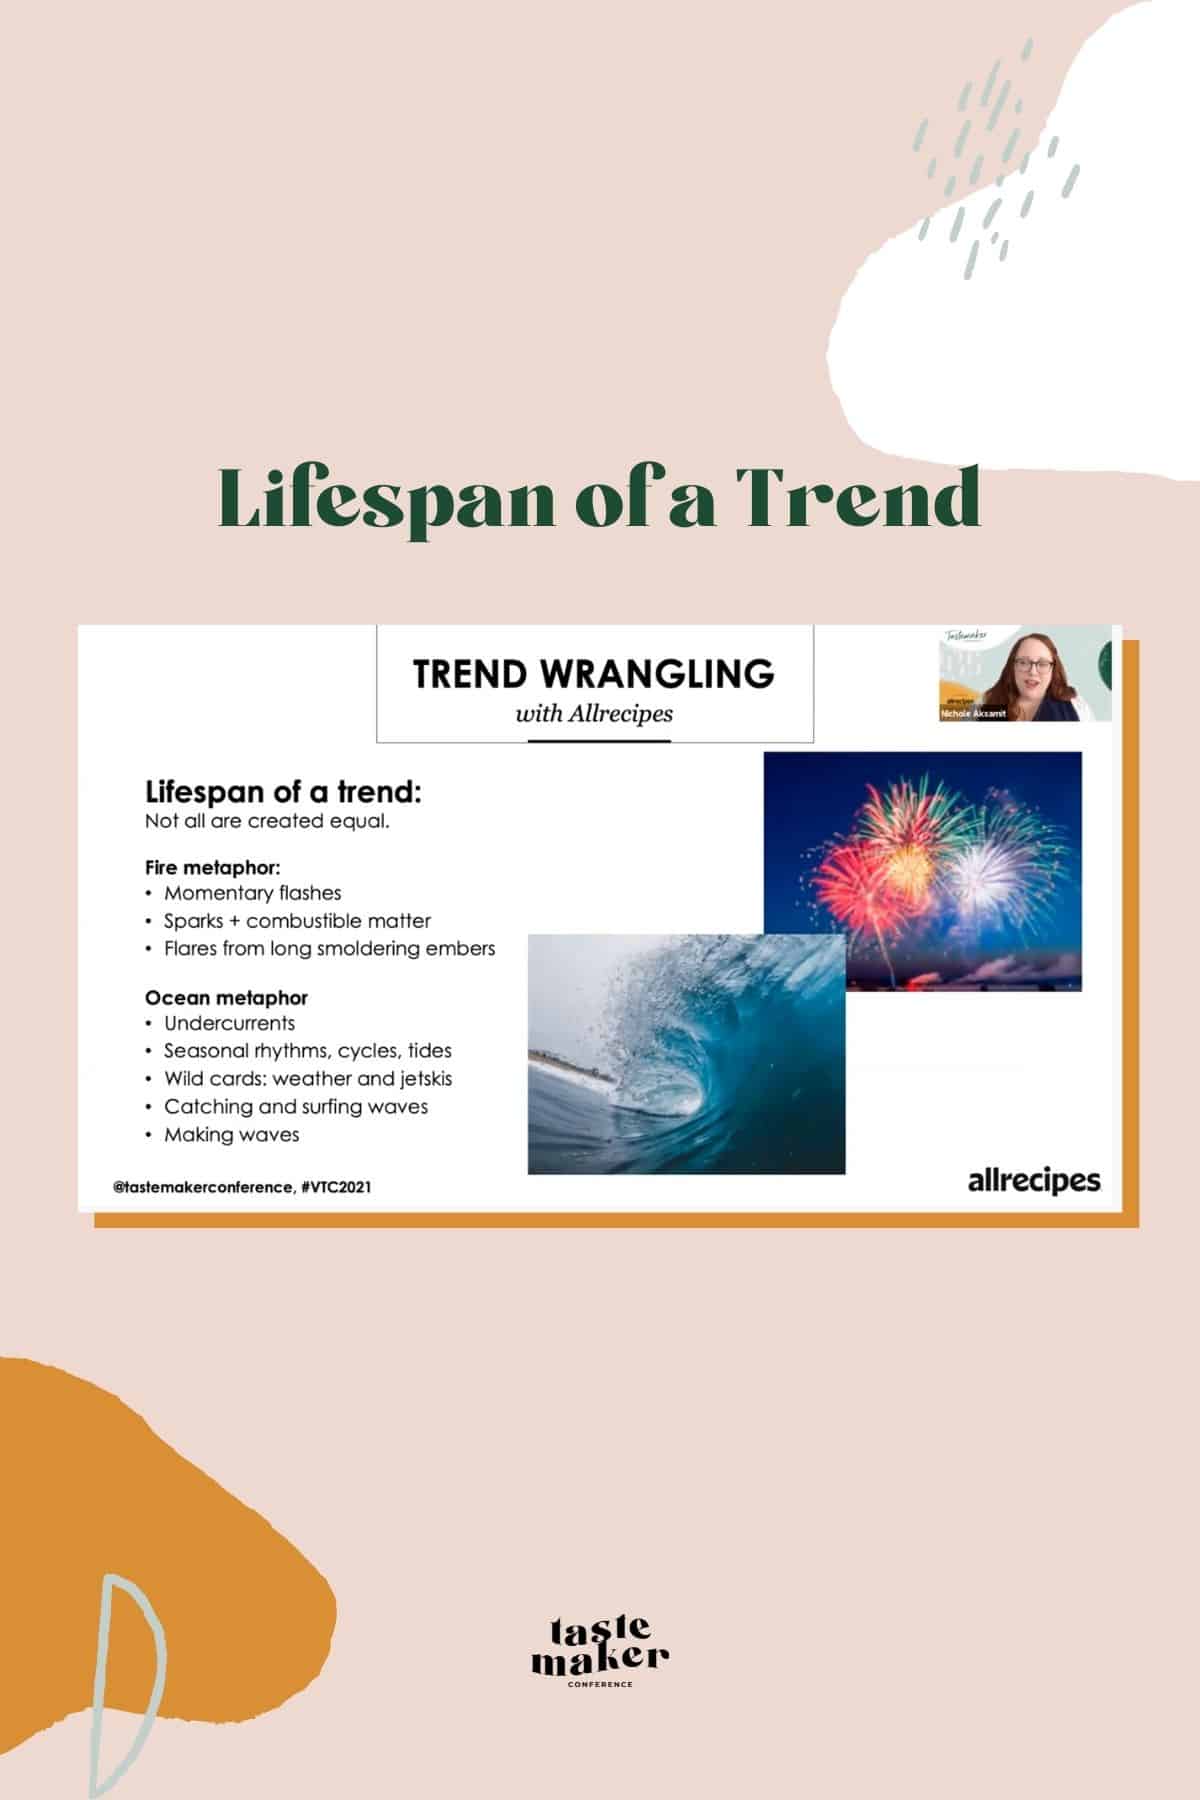 slide with title of section and image from webinar - lifespan of trend